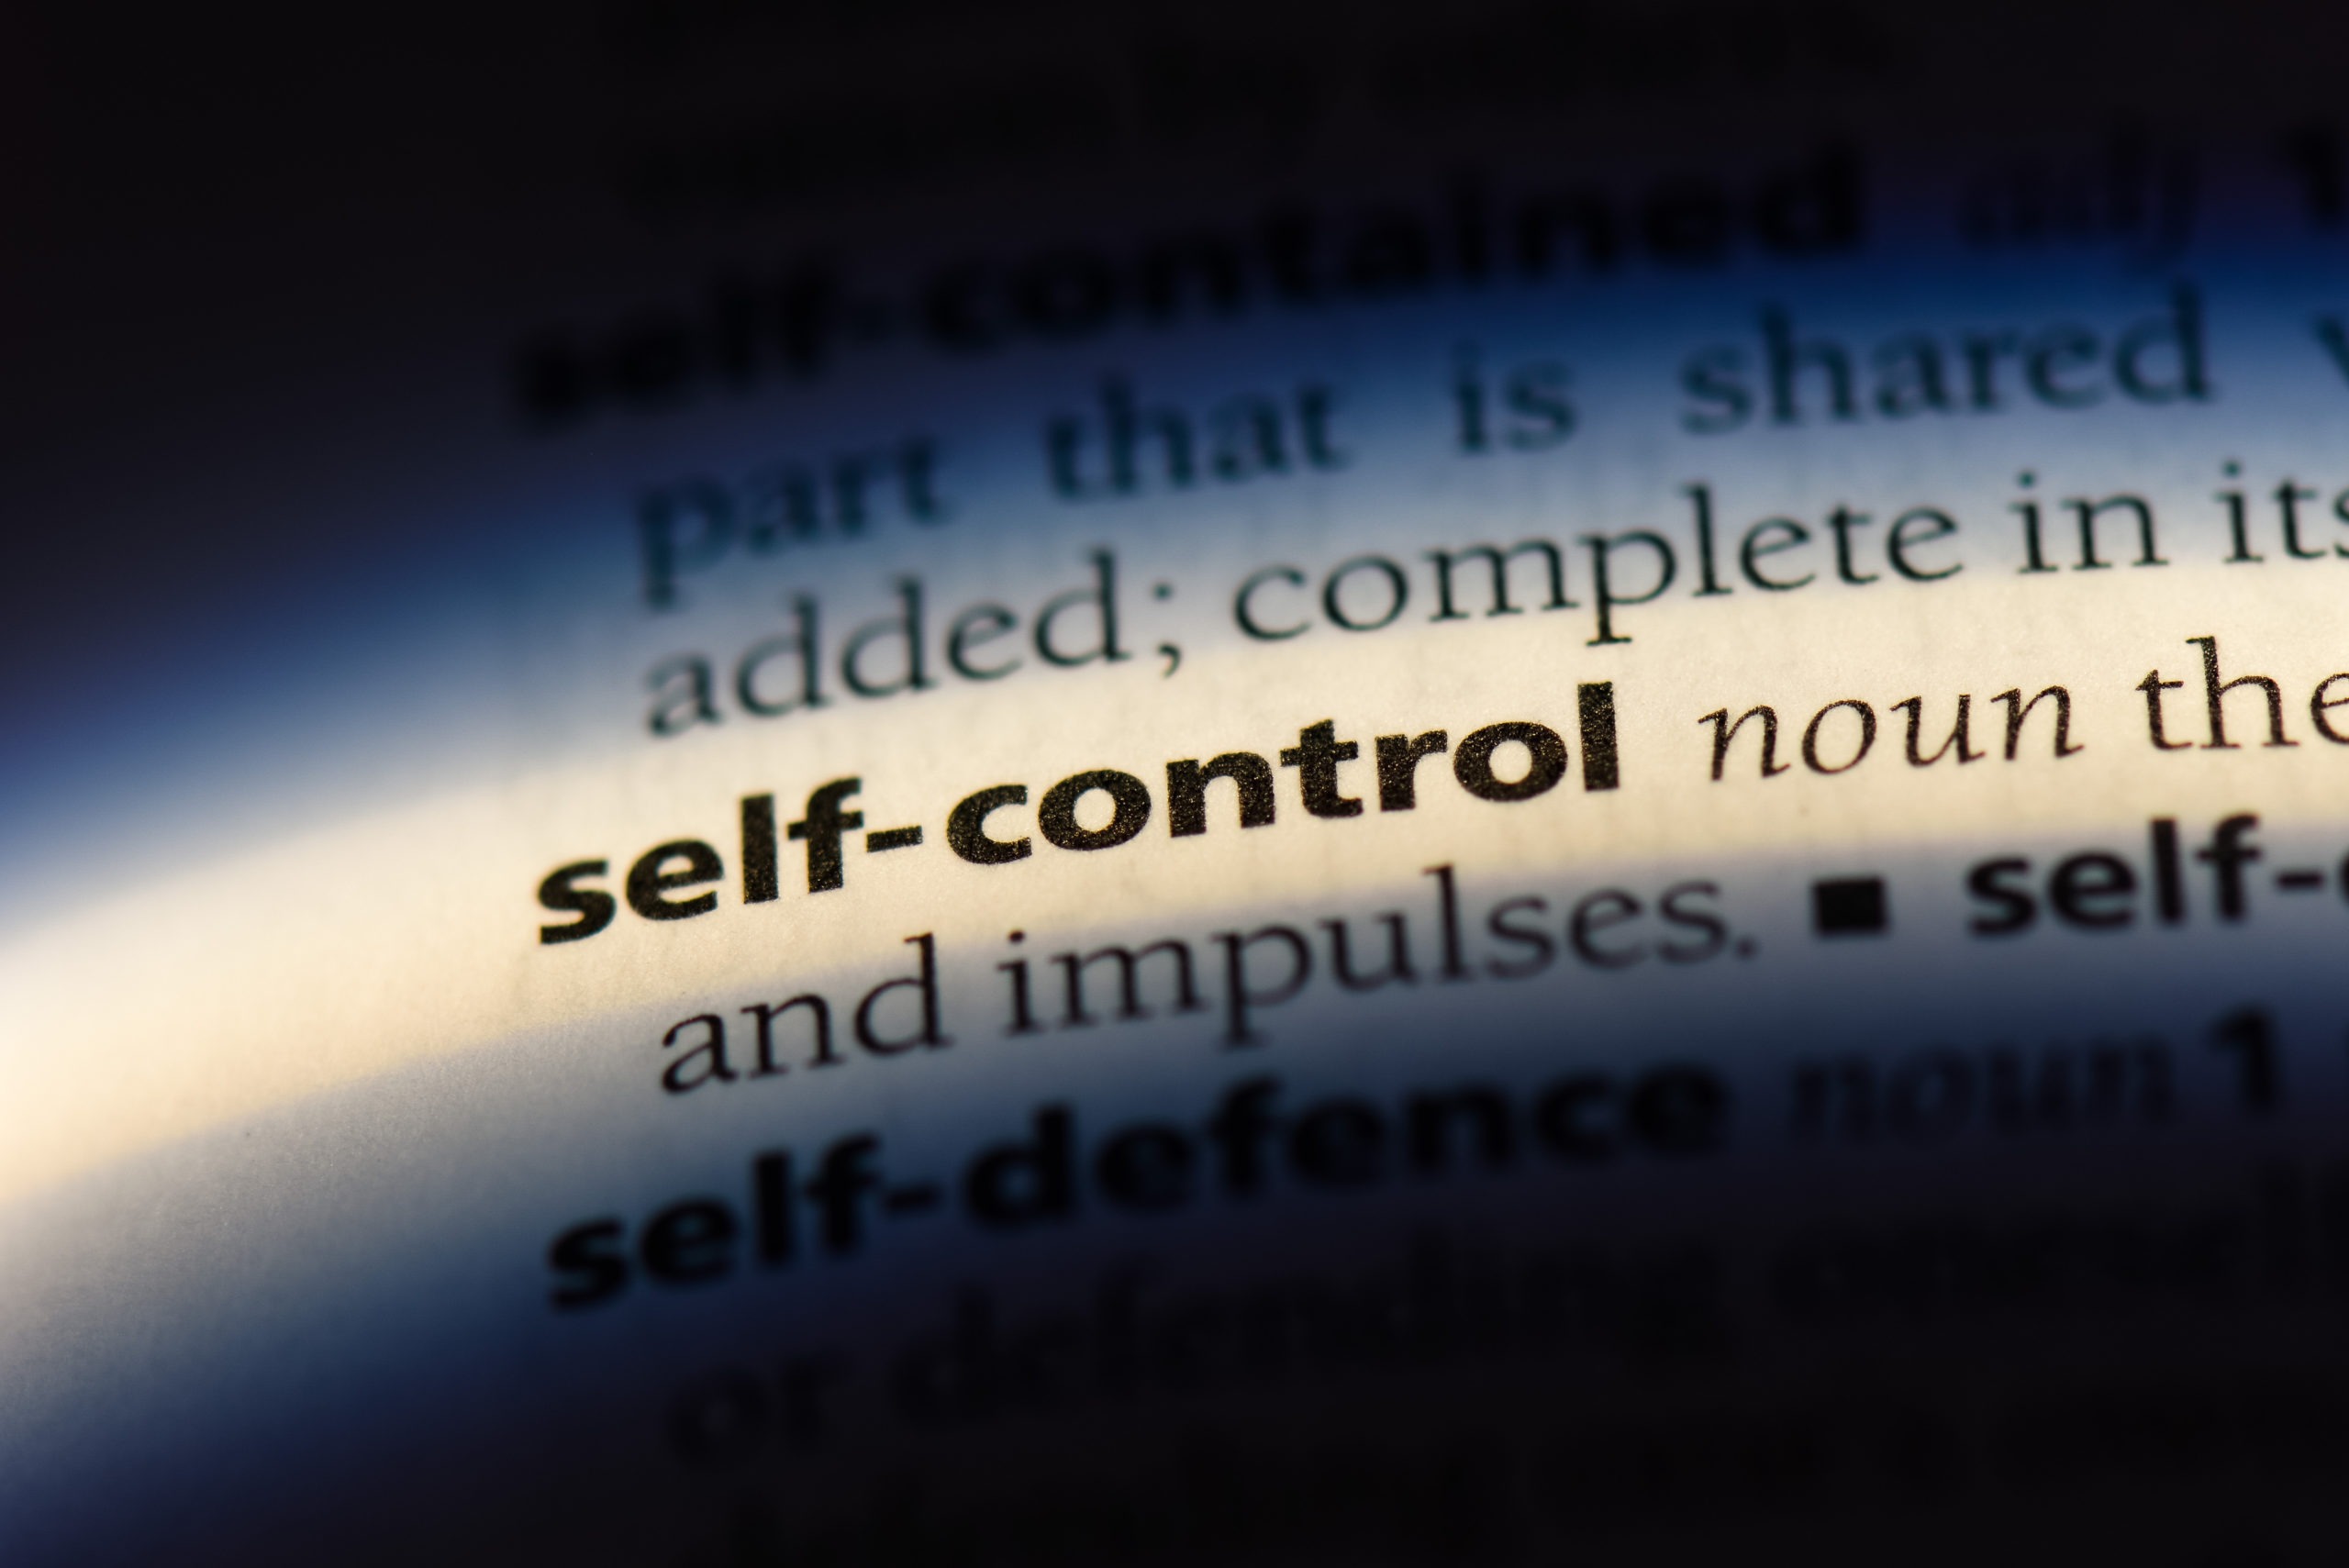 Zoomed in photo of the word "self-control noun" in a dictionary. The other surrounding words are in the dark. Self-control is essential for breaking bad habits.